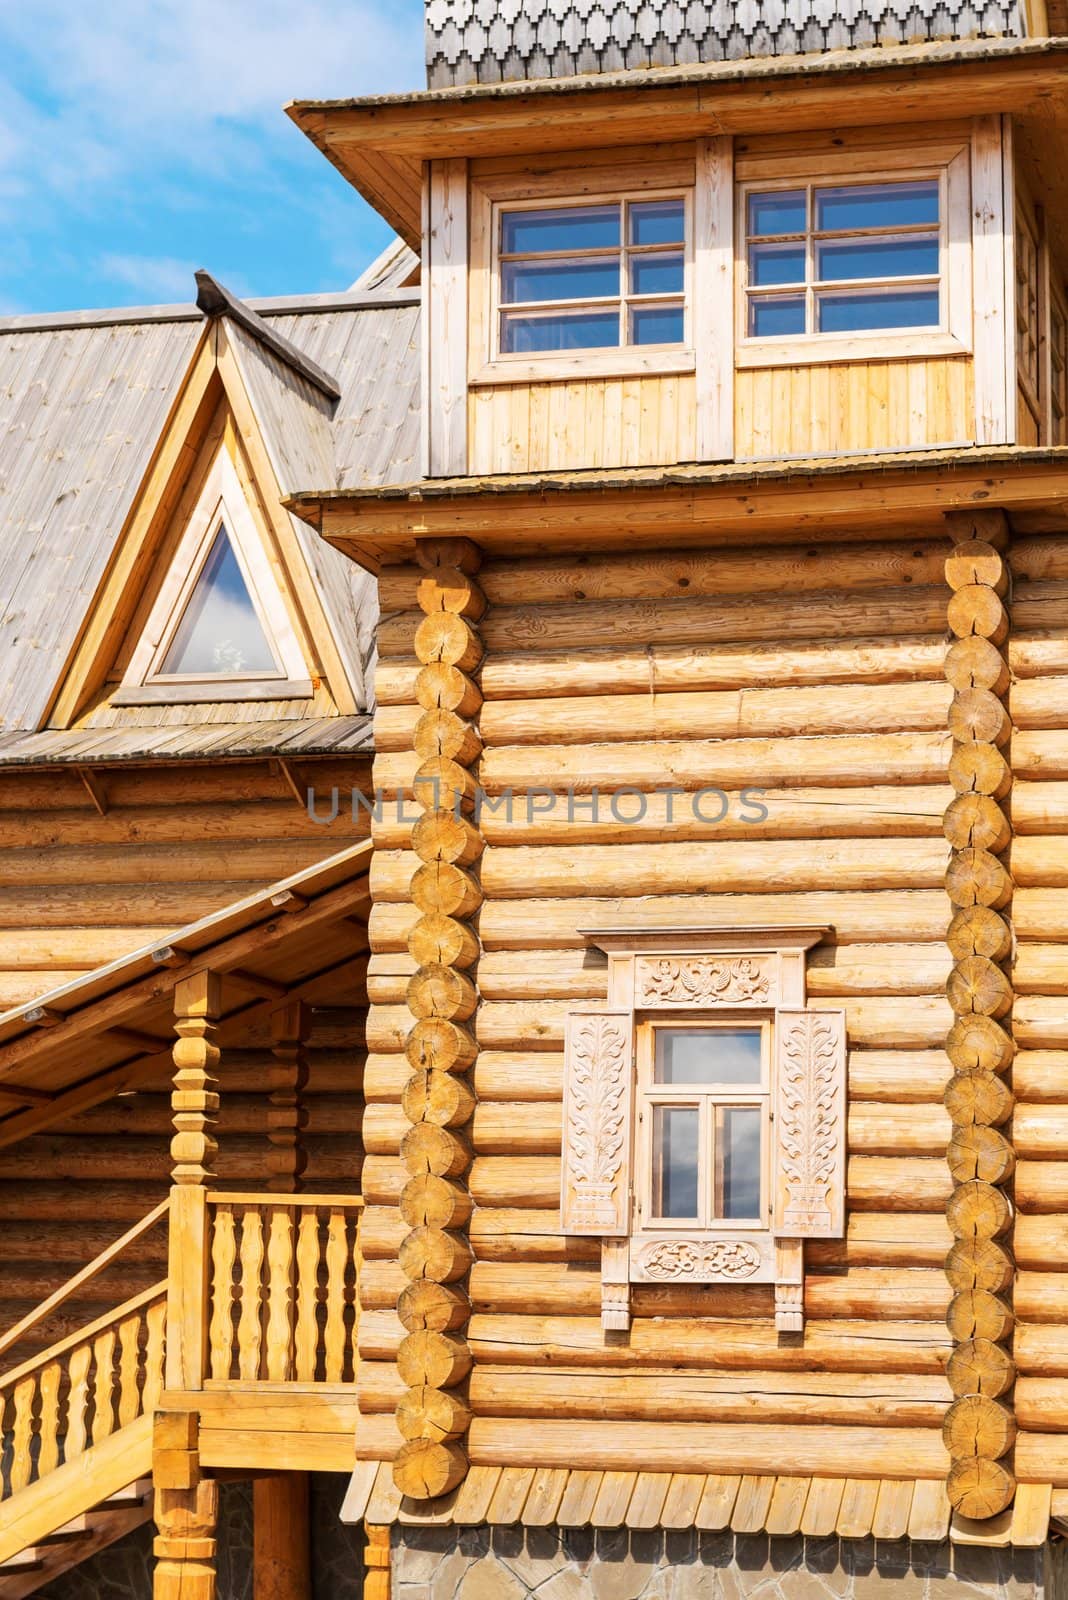 Wooden blockhouse with decorated windows, Russian traditional architecture.